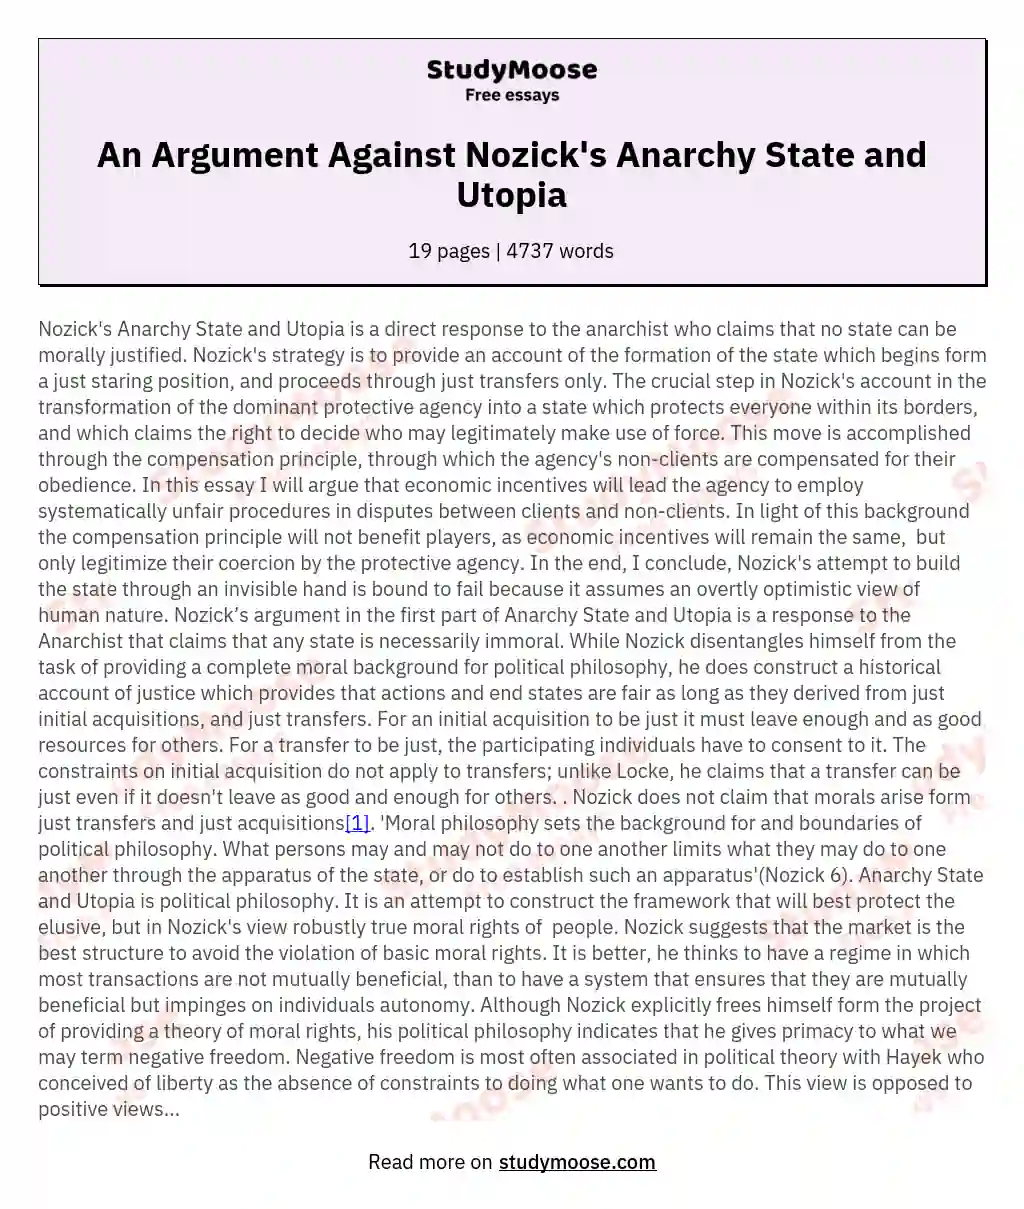 An Argument Against Nozick's Anarchy State and Utopia essay